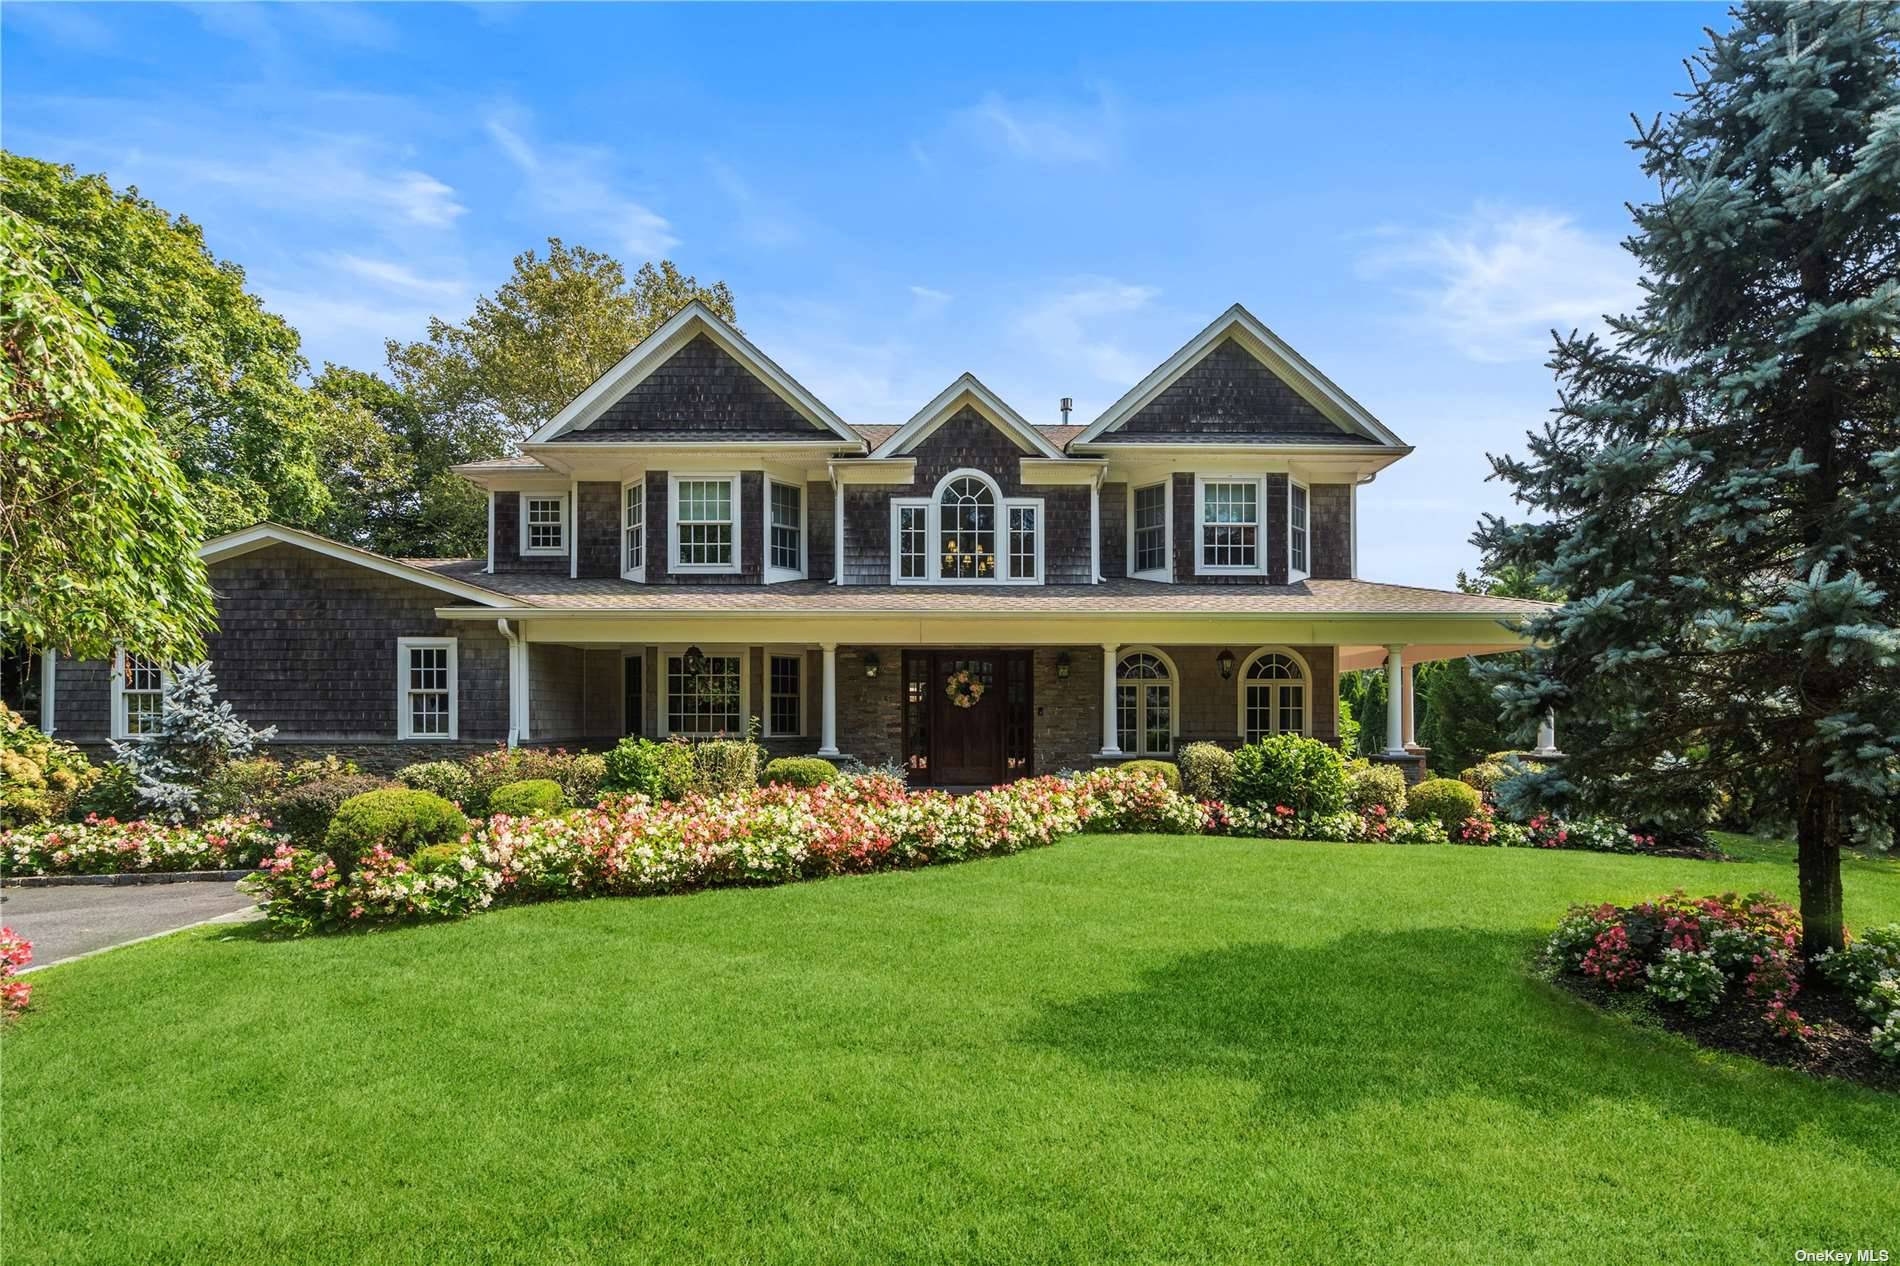 Welcome To This Spectacular App 4900 Sq Ft Custom Built Central Hall Colonial With Wrap Around Porch, Build by a Masterful Renowned Luxury Builder In the Heart of East Williston, ...